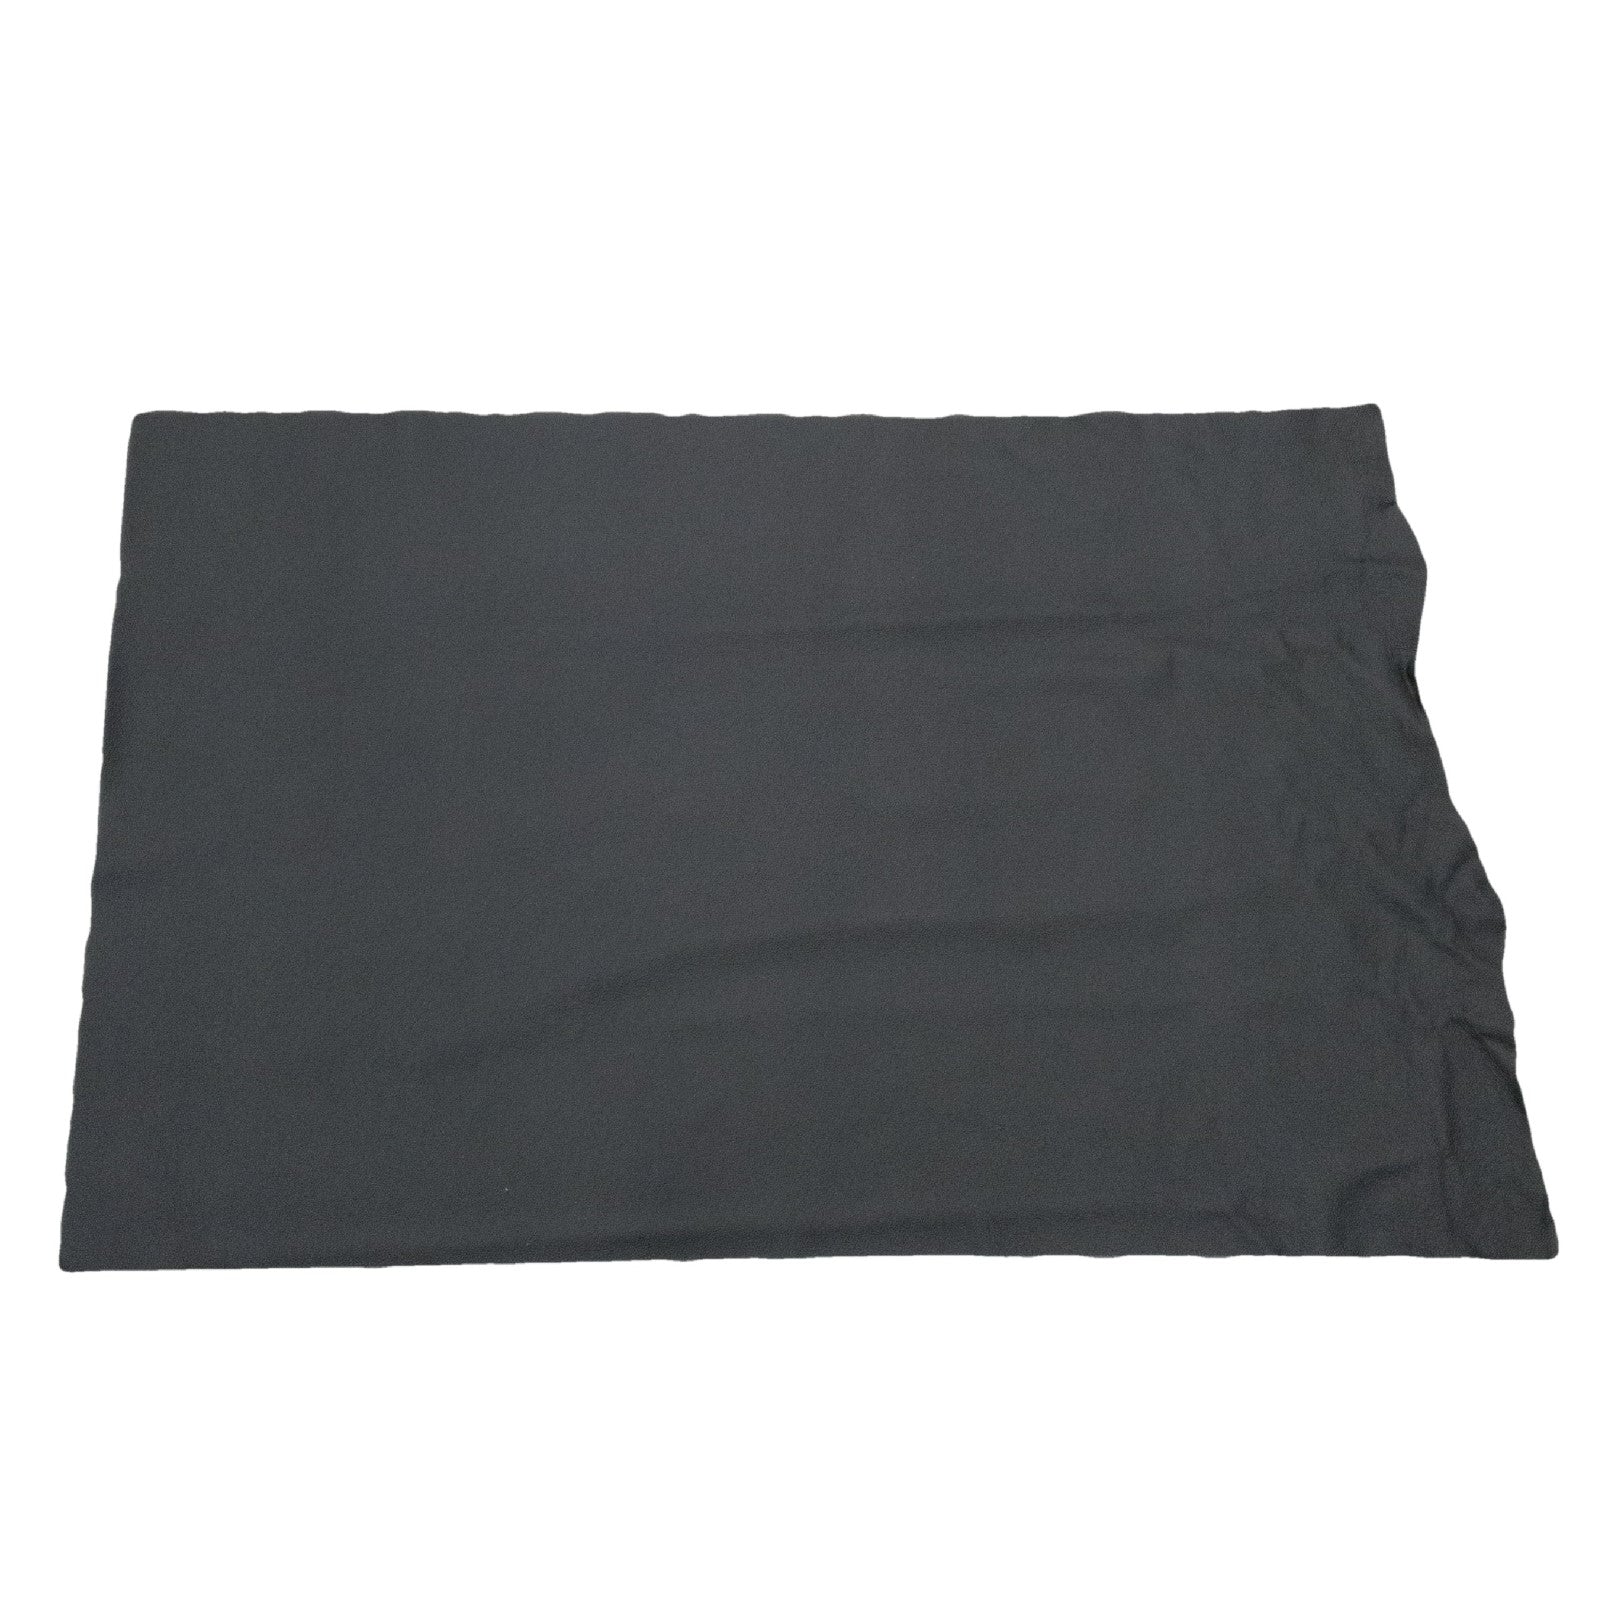 Classic Black, 5.5-20 Sq Ft, 2.5-3 oz Cow Hides, Vital Upholstery Collection, Middle Piece / 5.5-6.5 | The Leather Guy